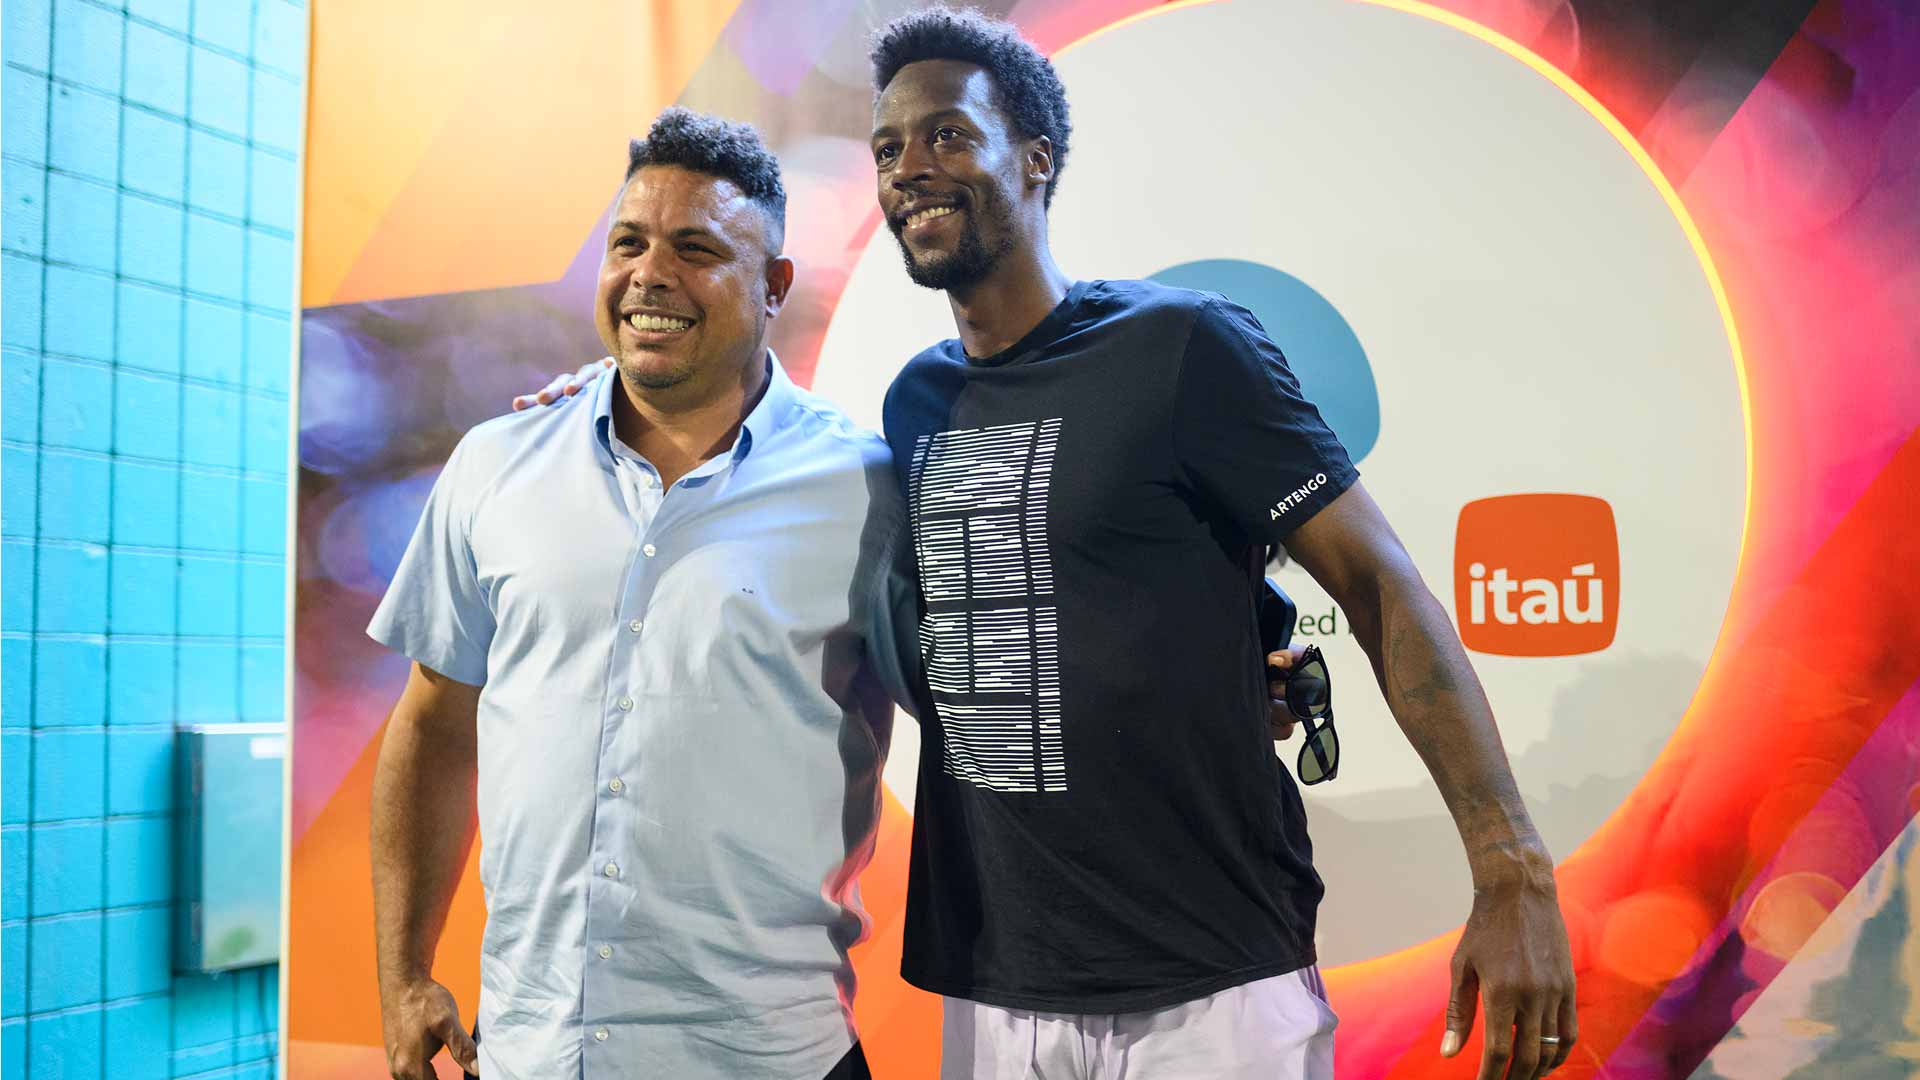 Ronaldo and Gael Monfils pose for a photo in Miami.